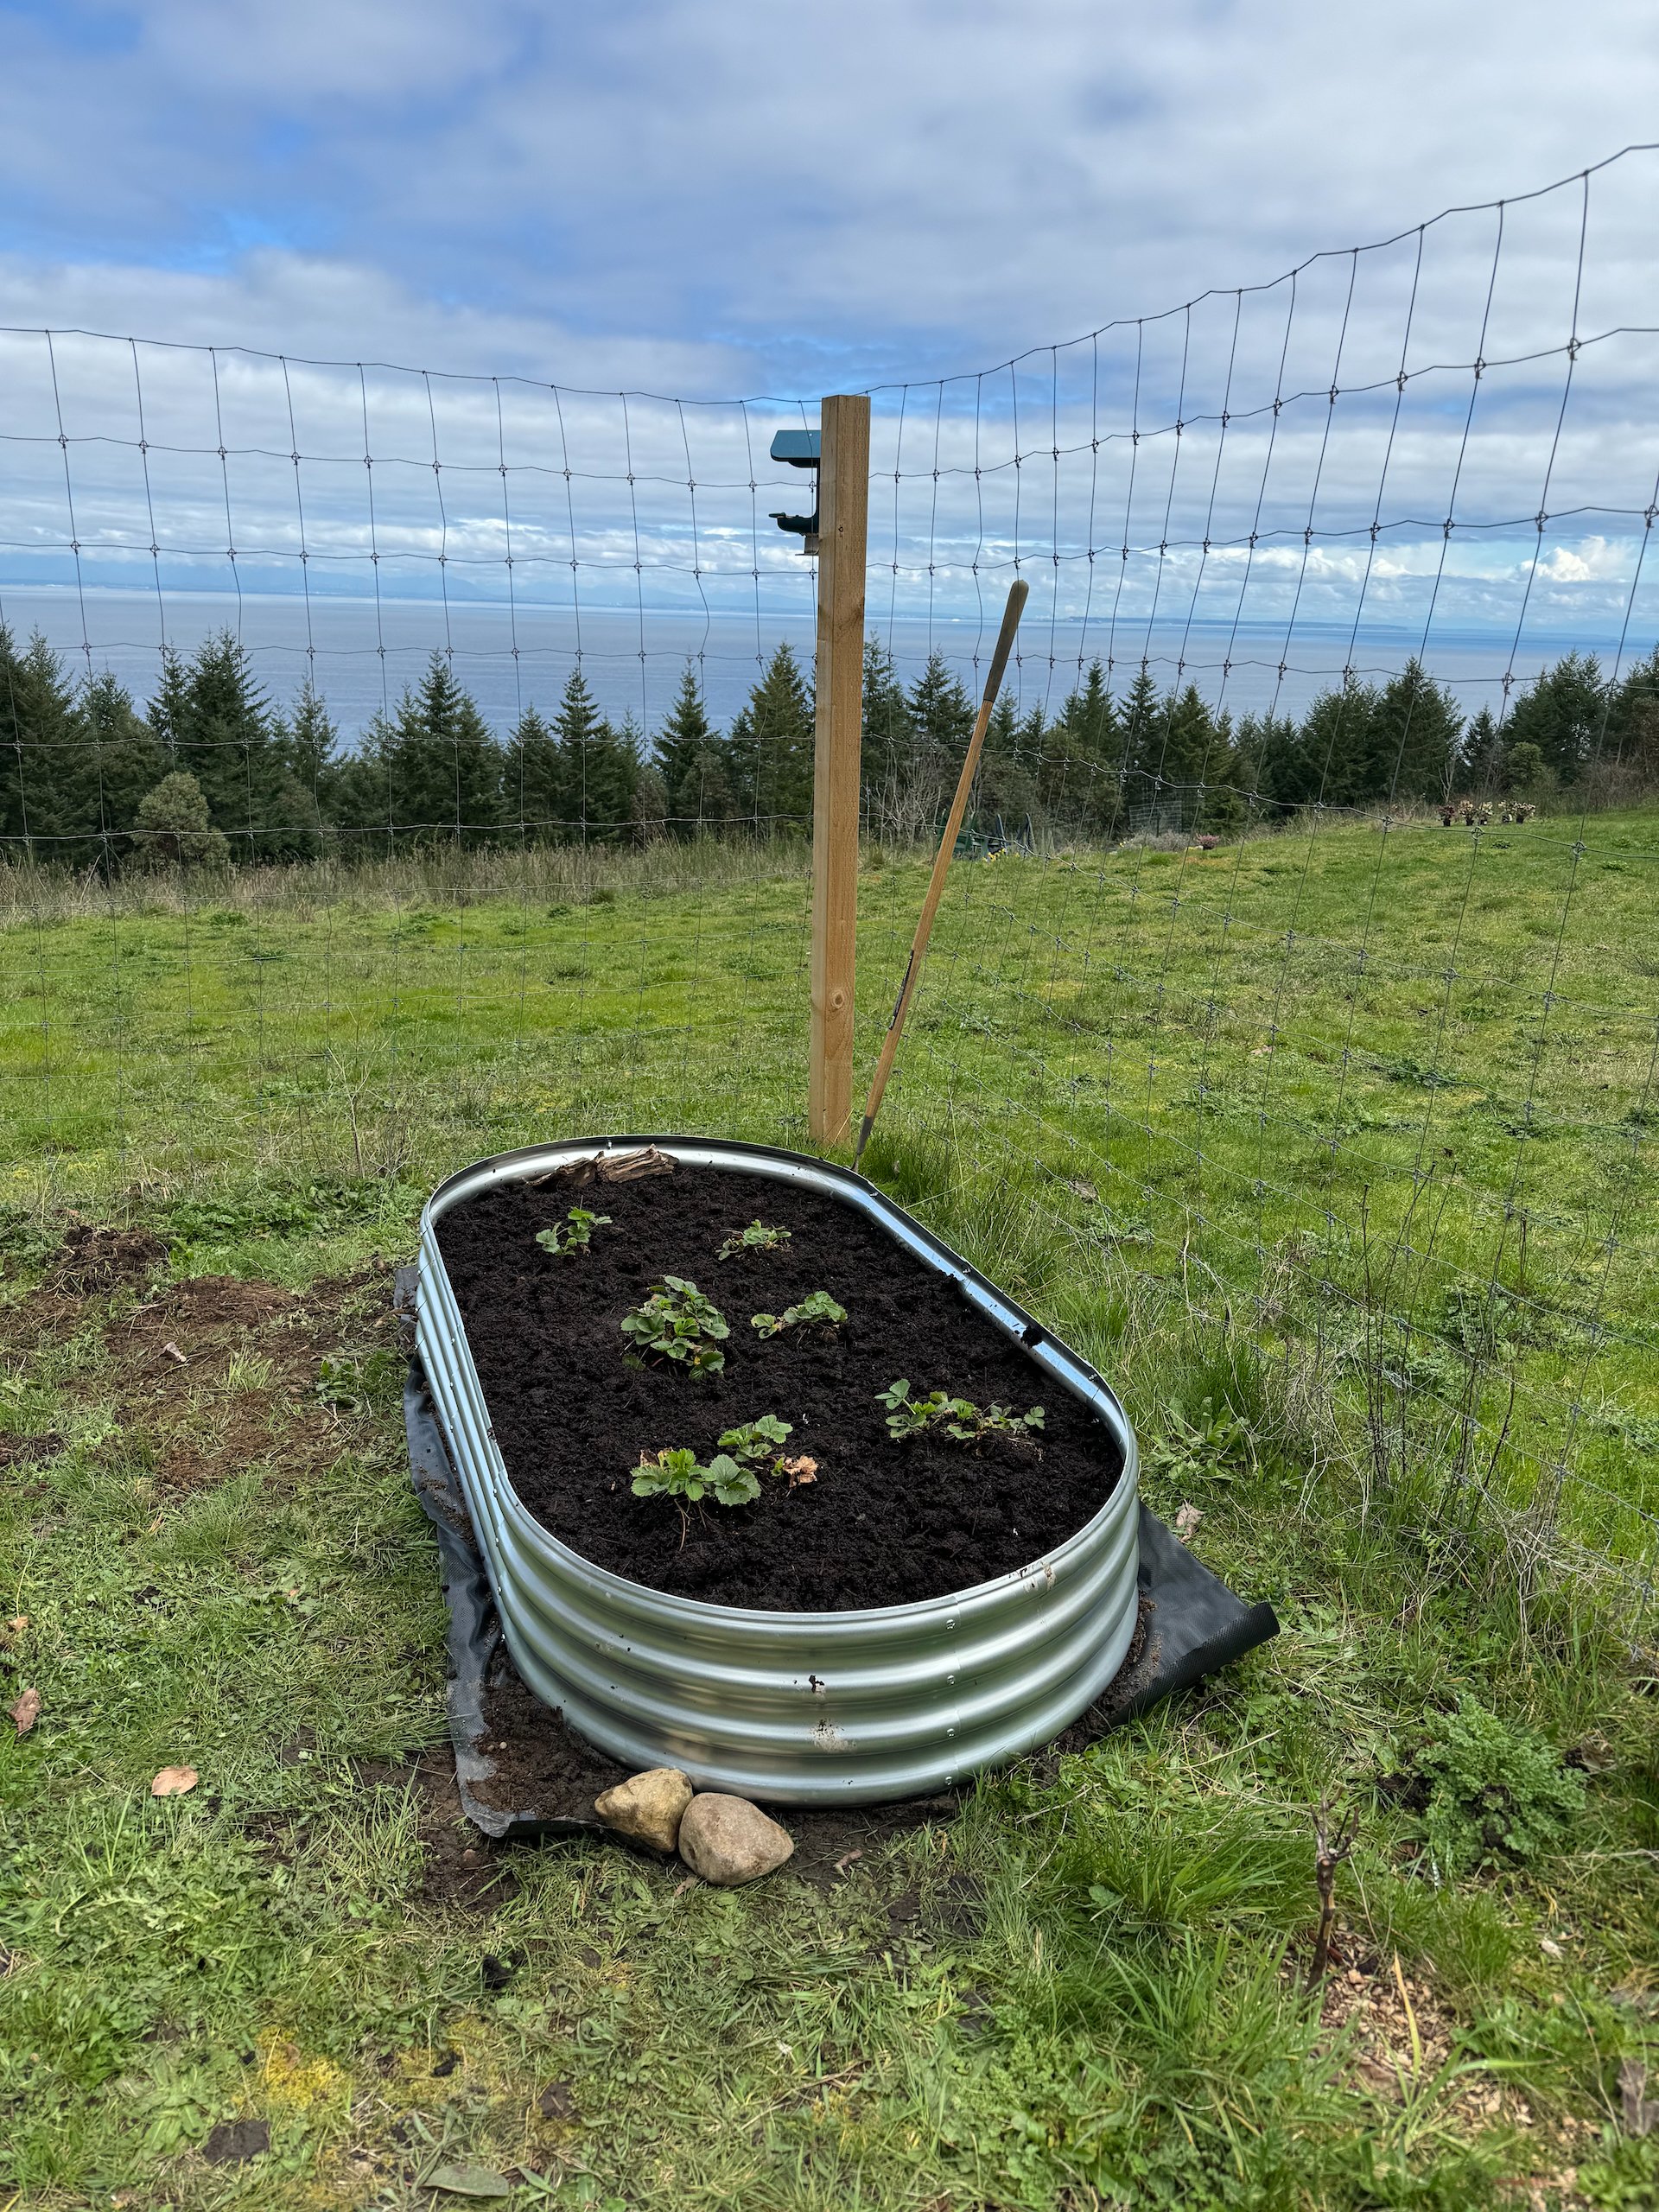  Justine had found this simple, cheap metal planters. So we dug up our strawberries and artichokes and gave them new homes with lots of fresh compost.  